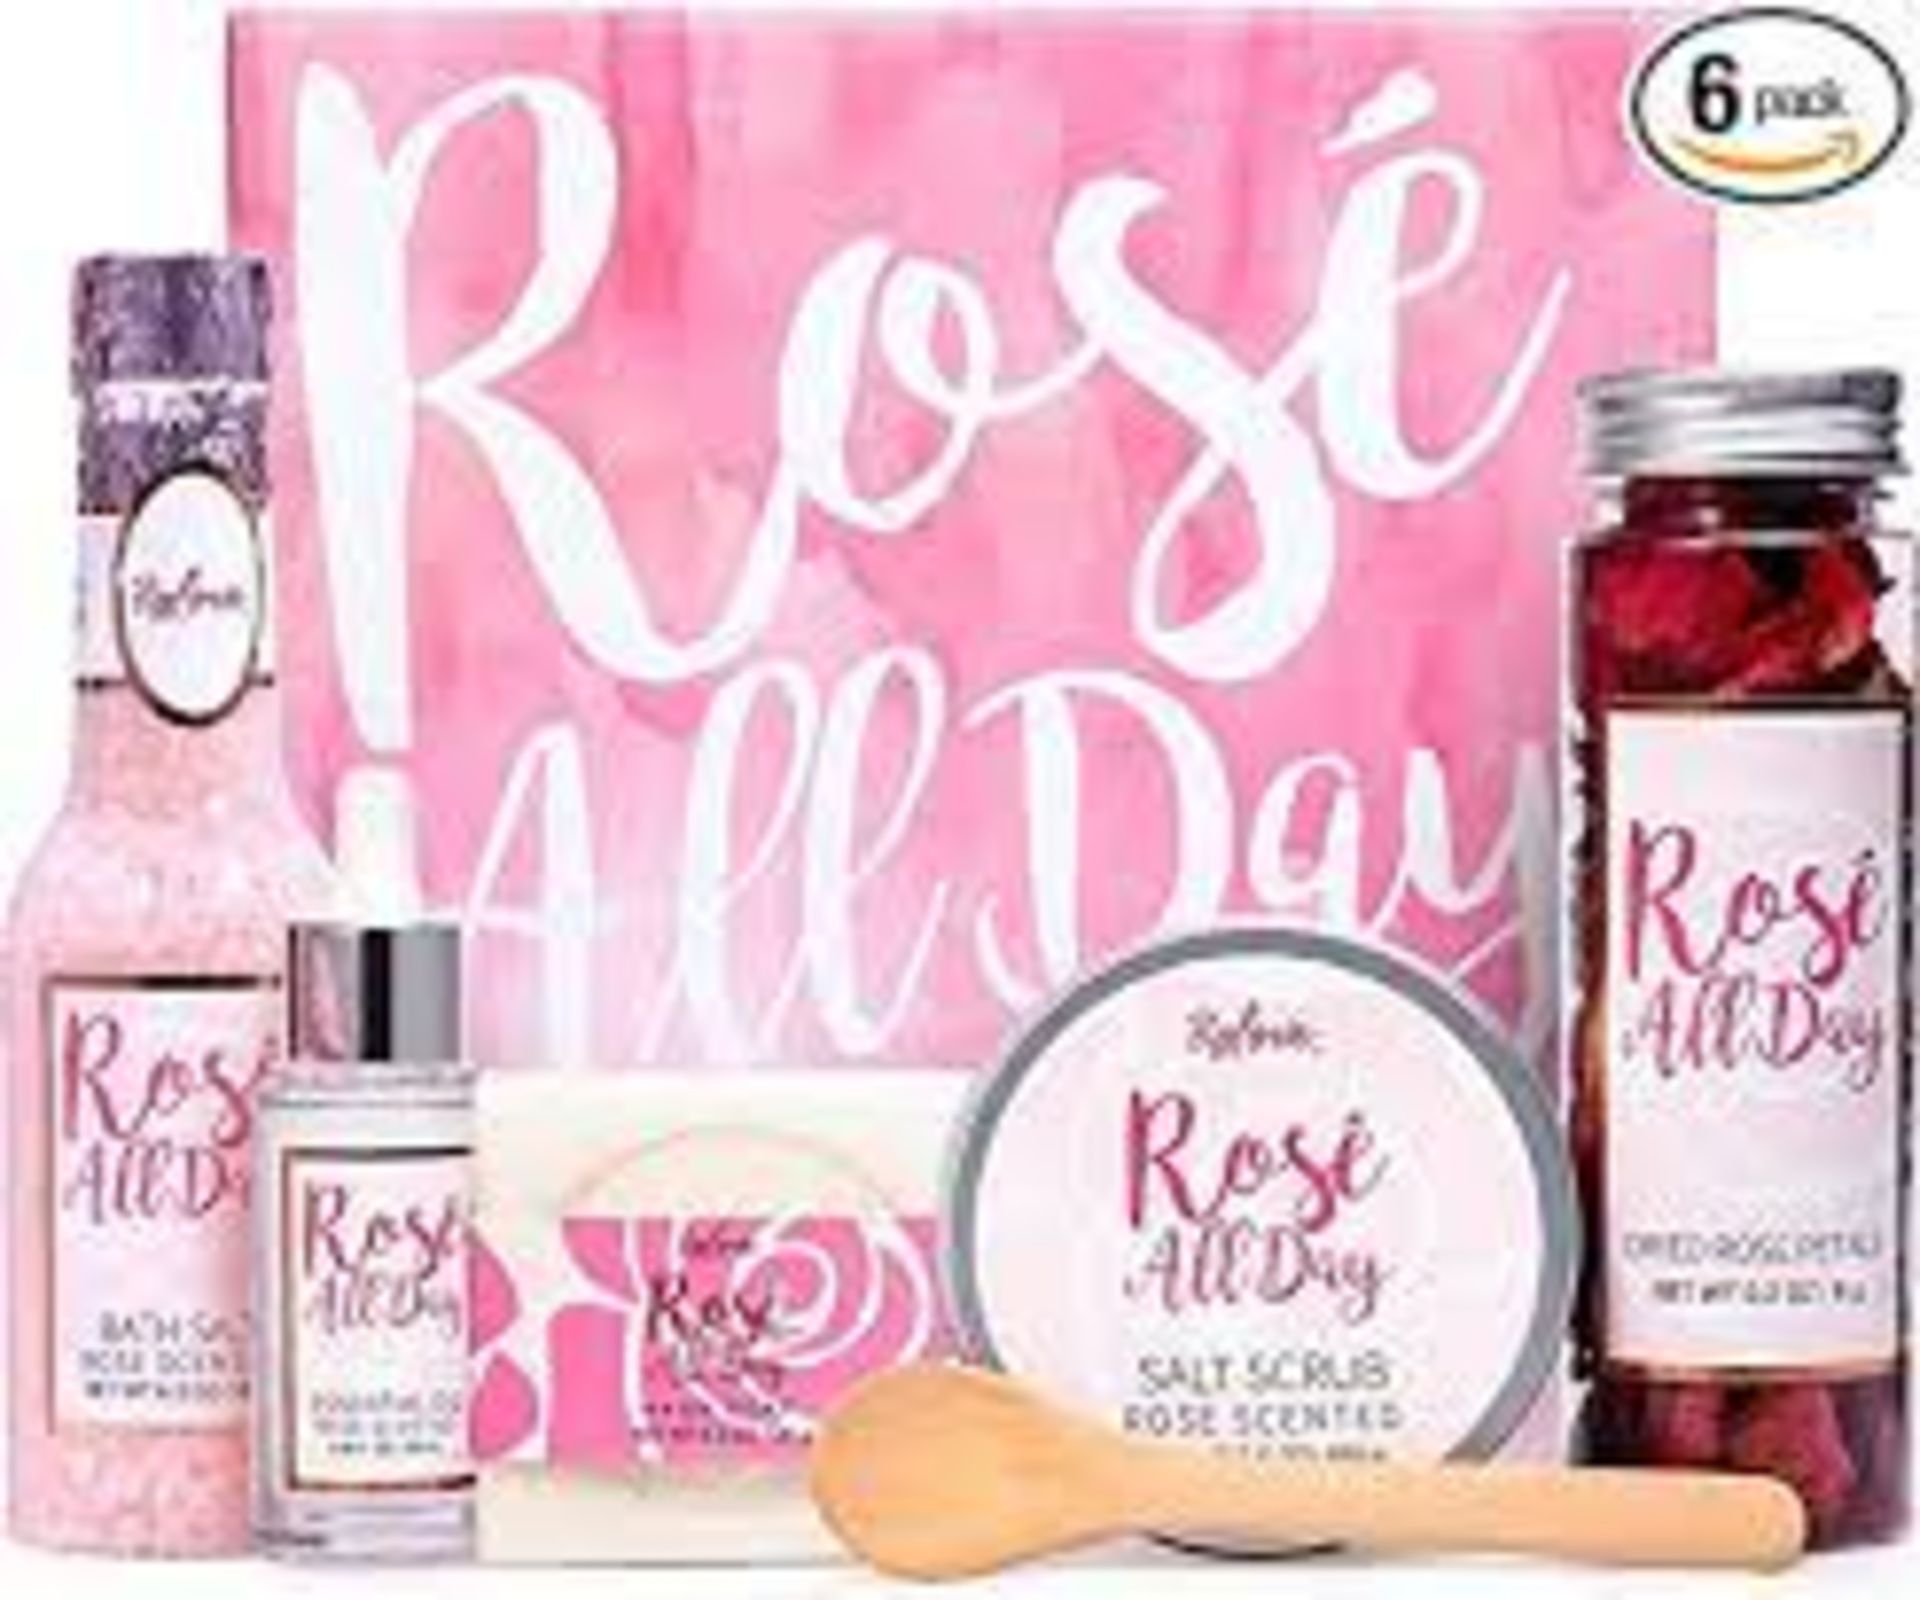 4 X NEW PACKAGED 6 Piece Rose Bath Gift Box. (SKU: SPA-6-ROSE). 6 Pcs Bath Gift Baskets: Our